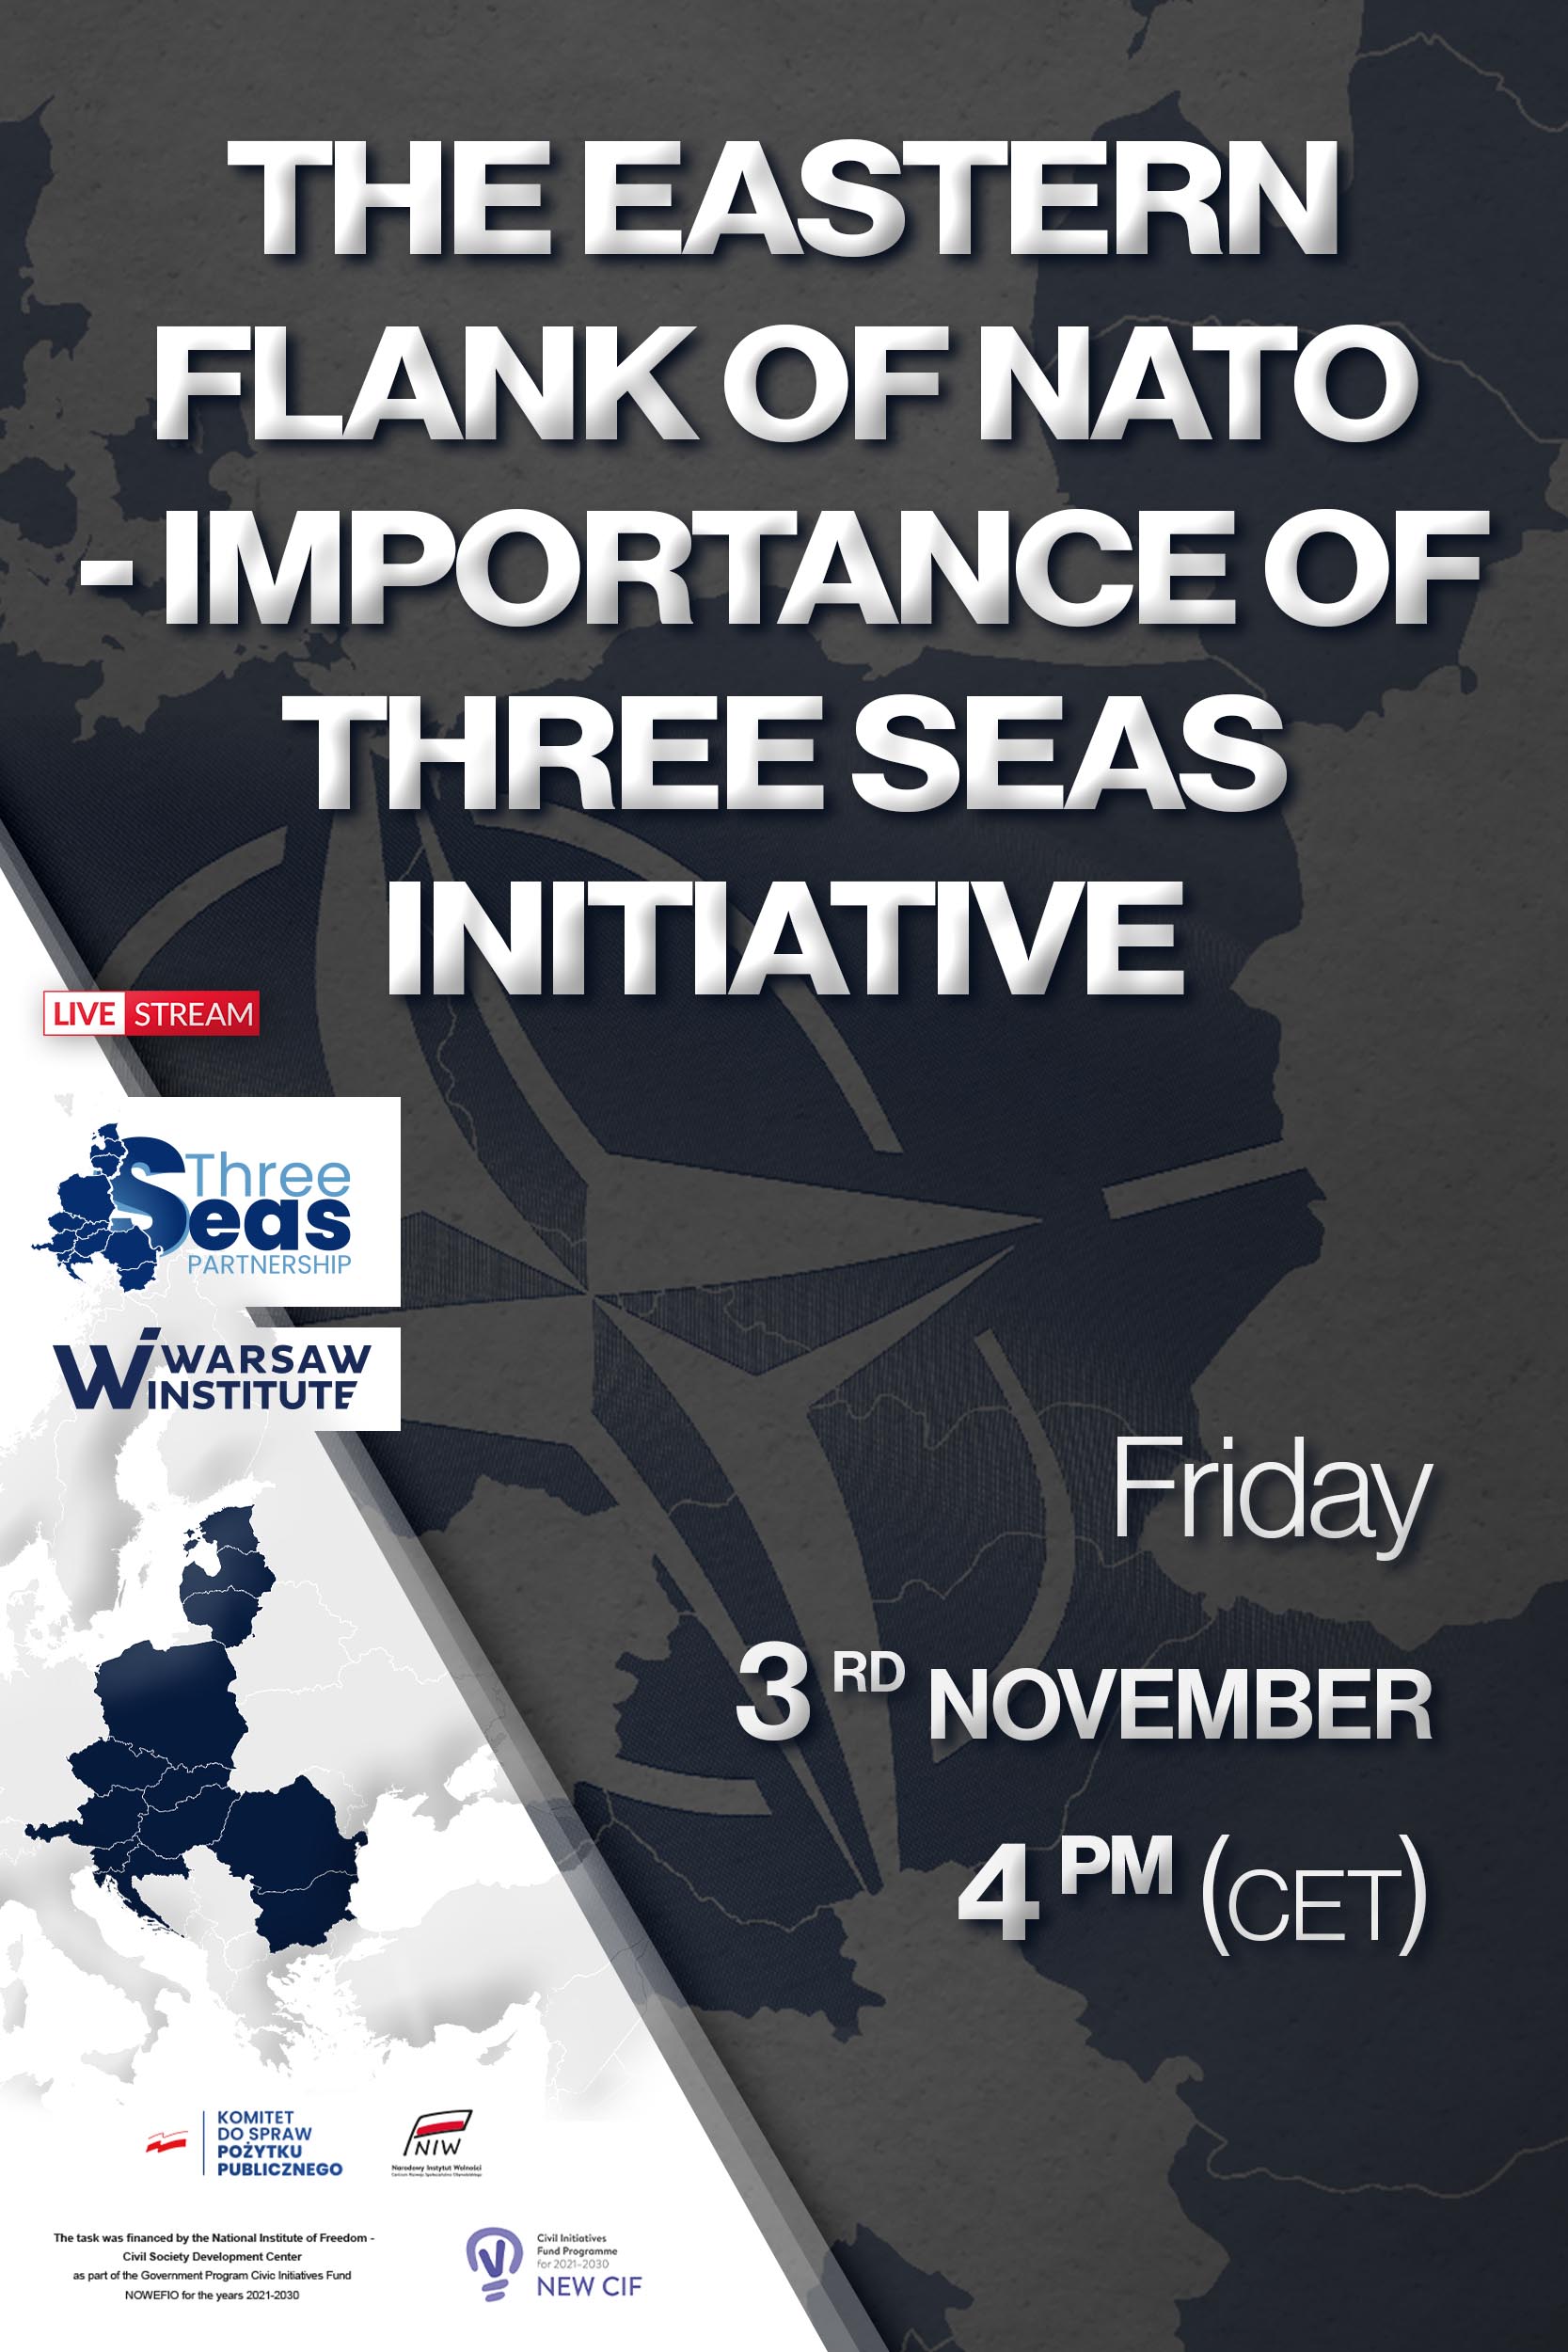 The Eastern flank of NATO – Importance of Three Seas Initiative